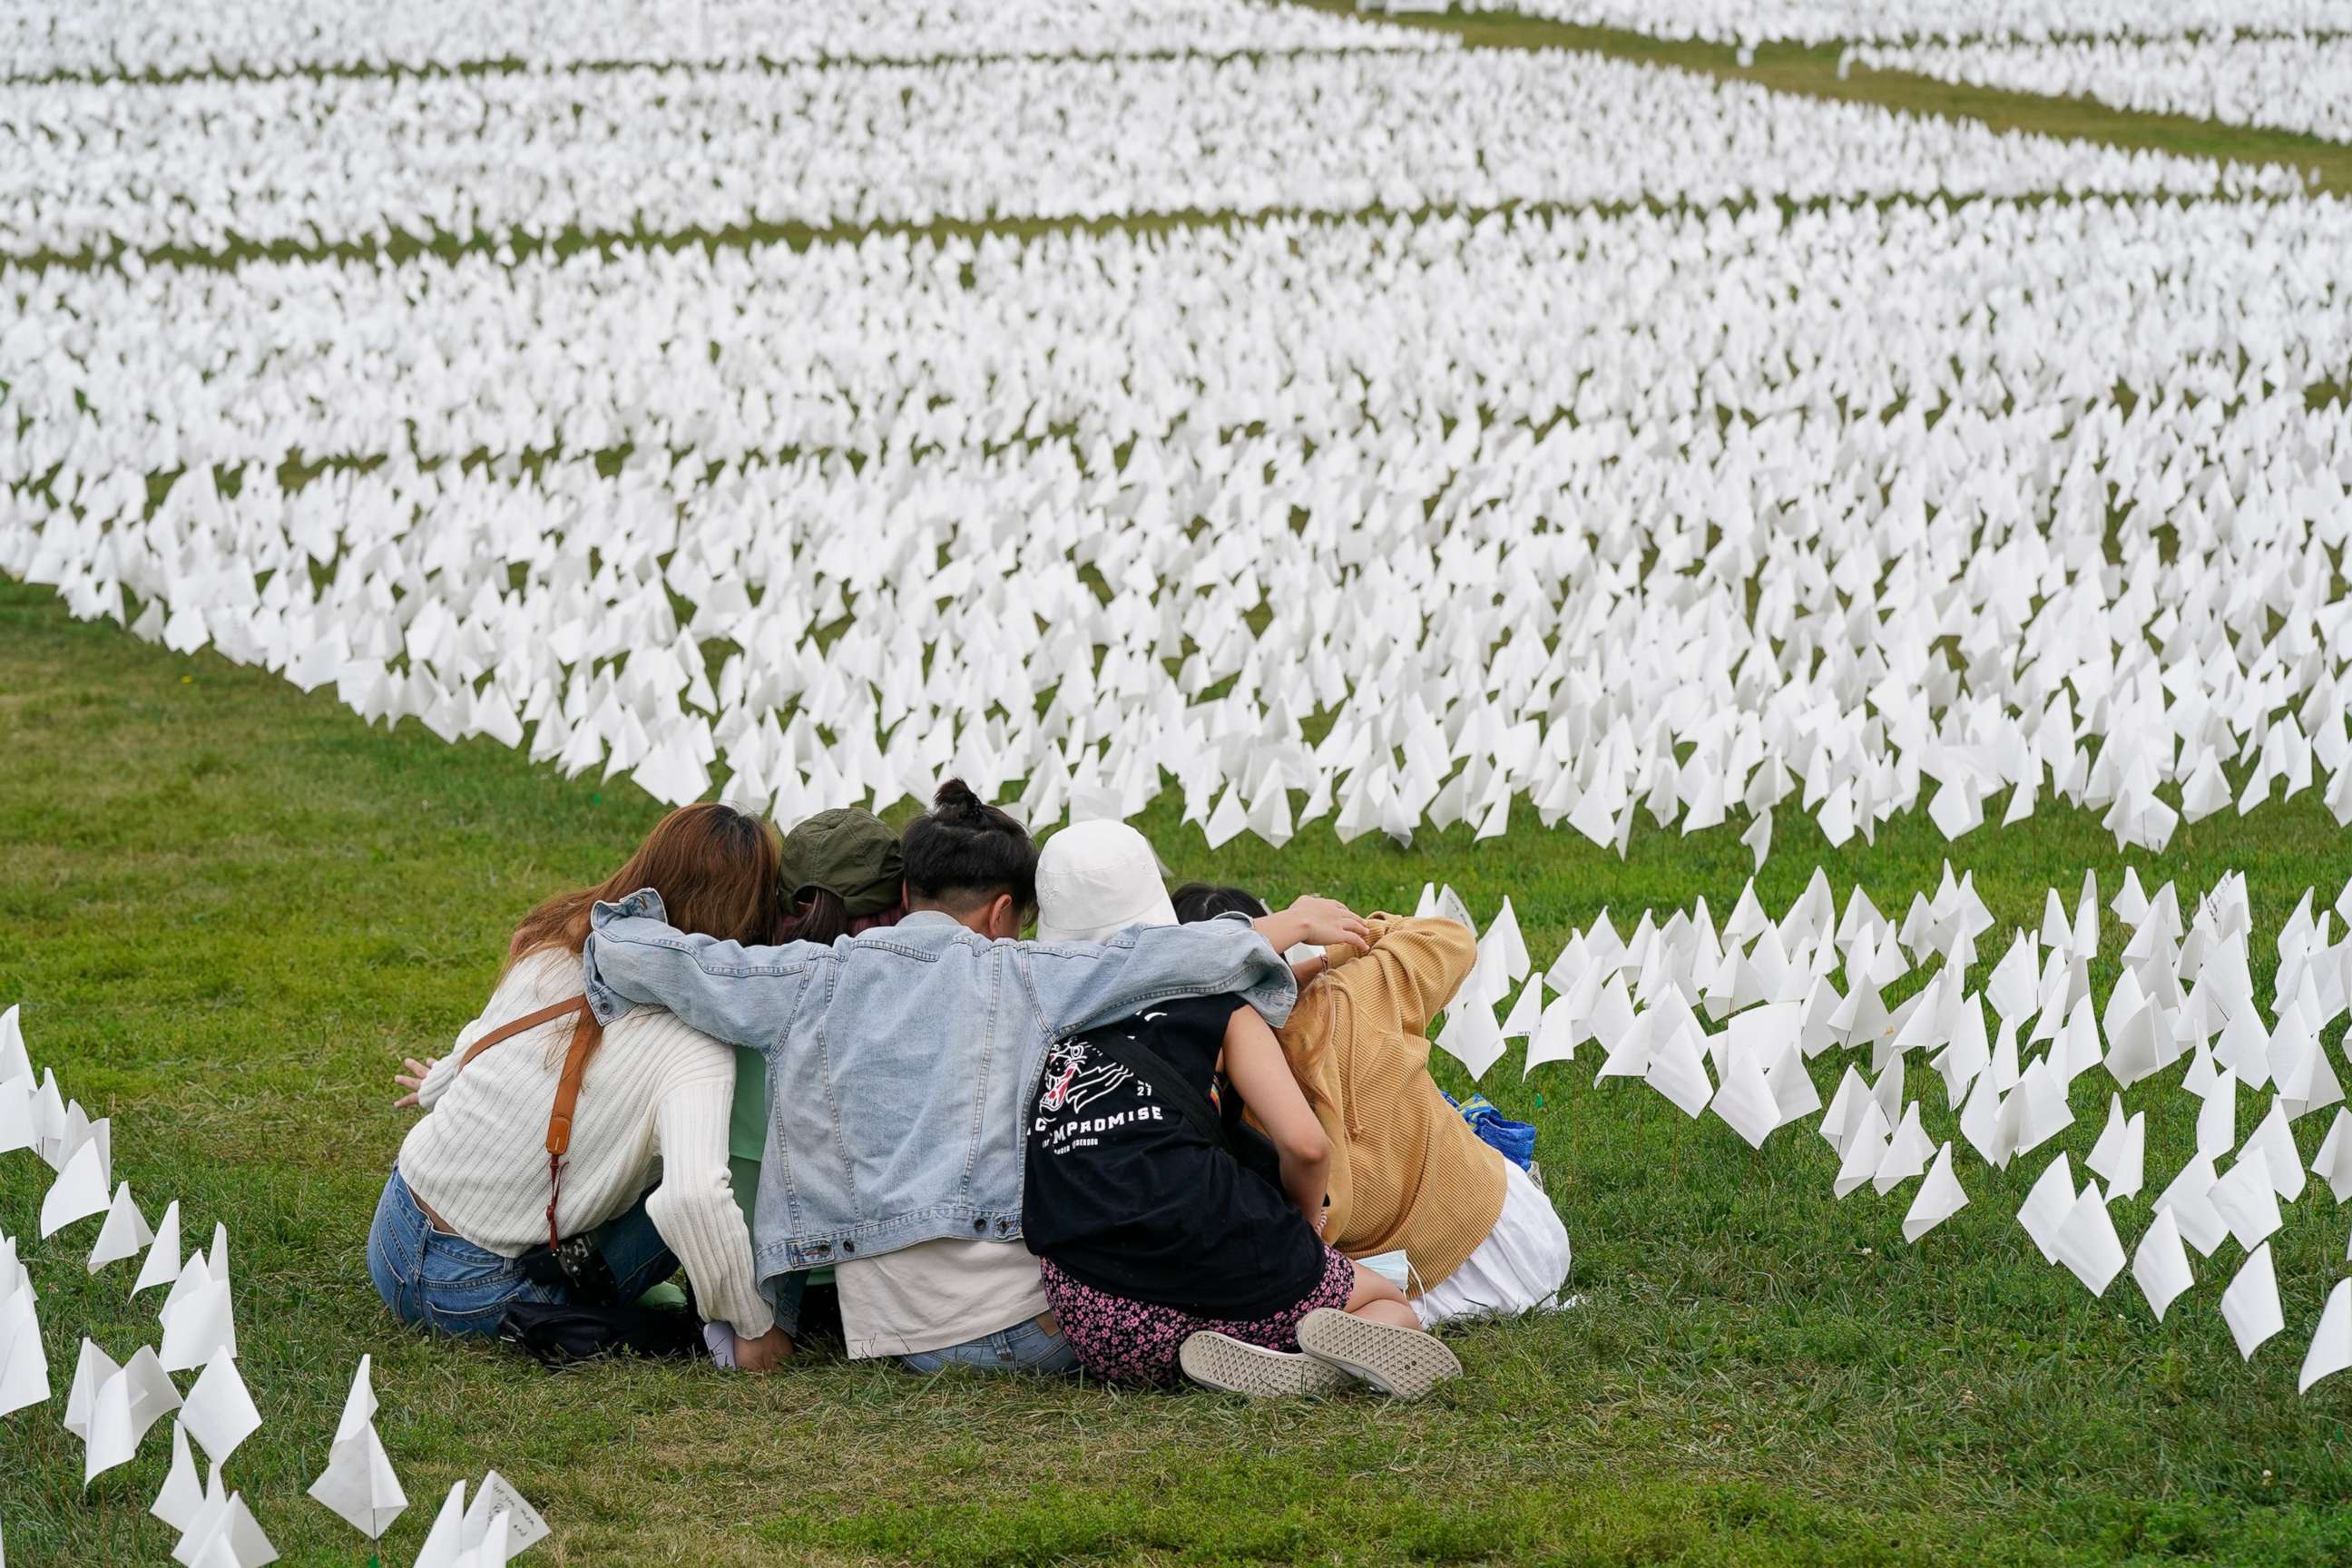 PHOTO: In this Sept. 21, 2021, file photo, visitors sit among white flags that are part of artist Suzanne Brennan Firstenberg's "In America: Remember," a temporary art installation to commemorate Americans who have died of COVID-19, in Washington, D.C.